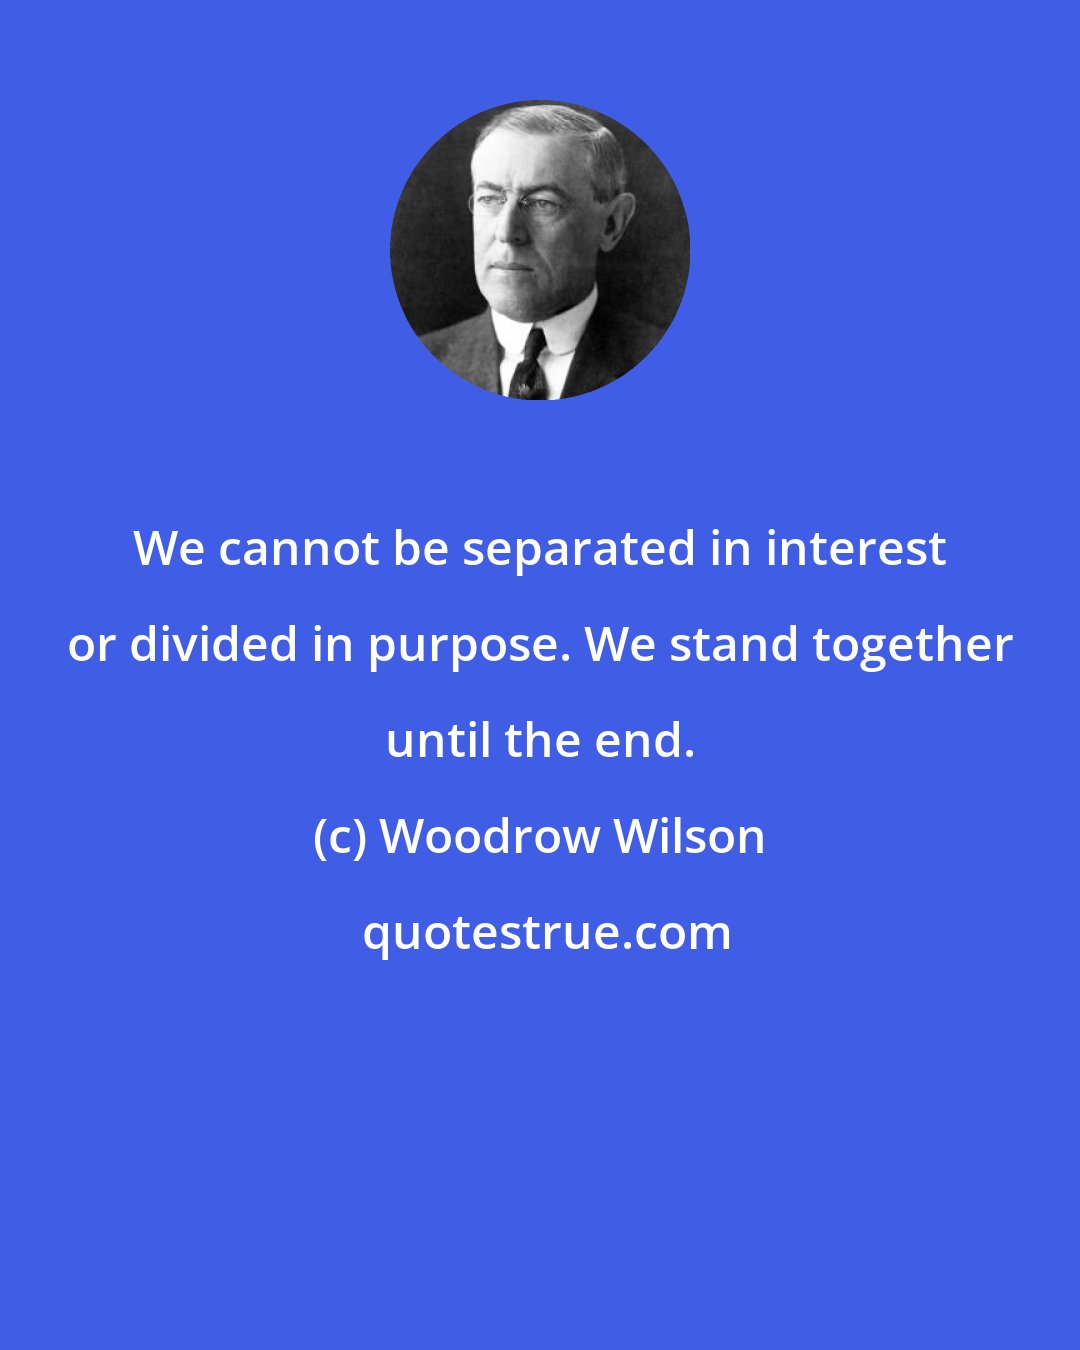 Woodrow Wilson: We cannot be separated in interest or divided in purpose. We stand together until the end.